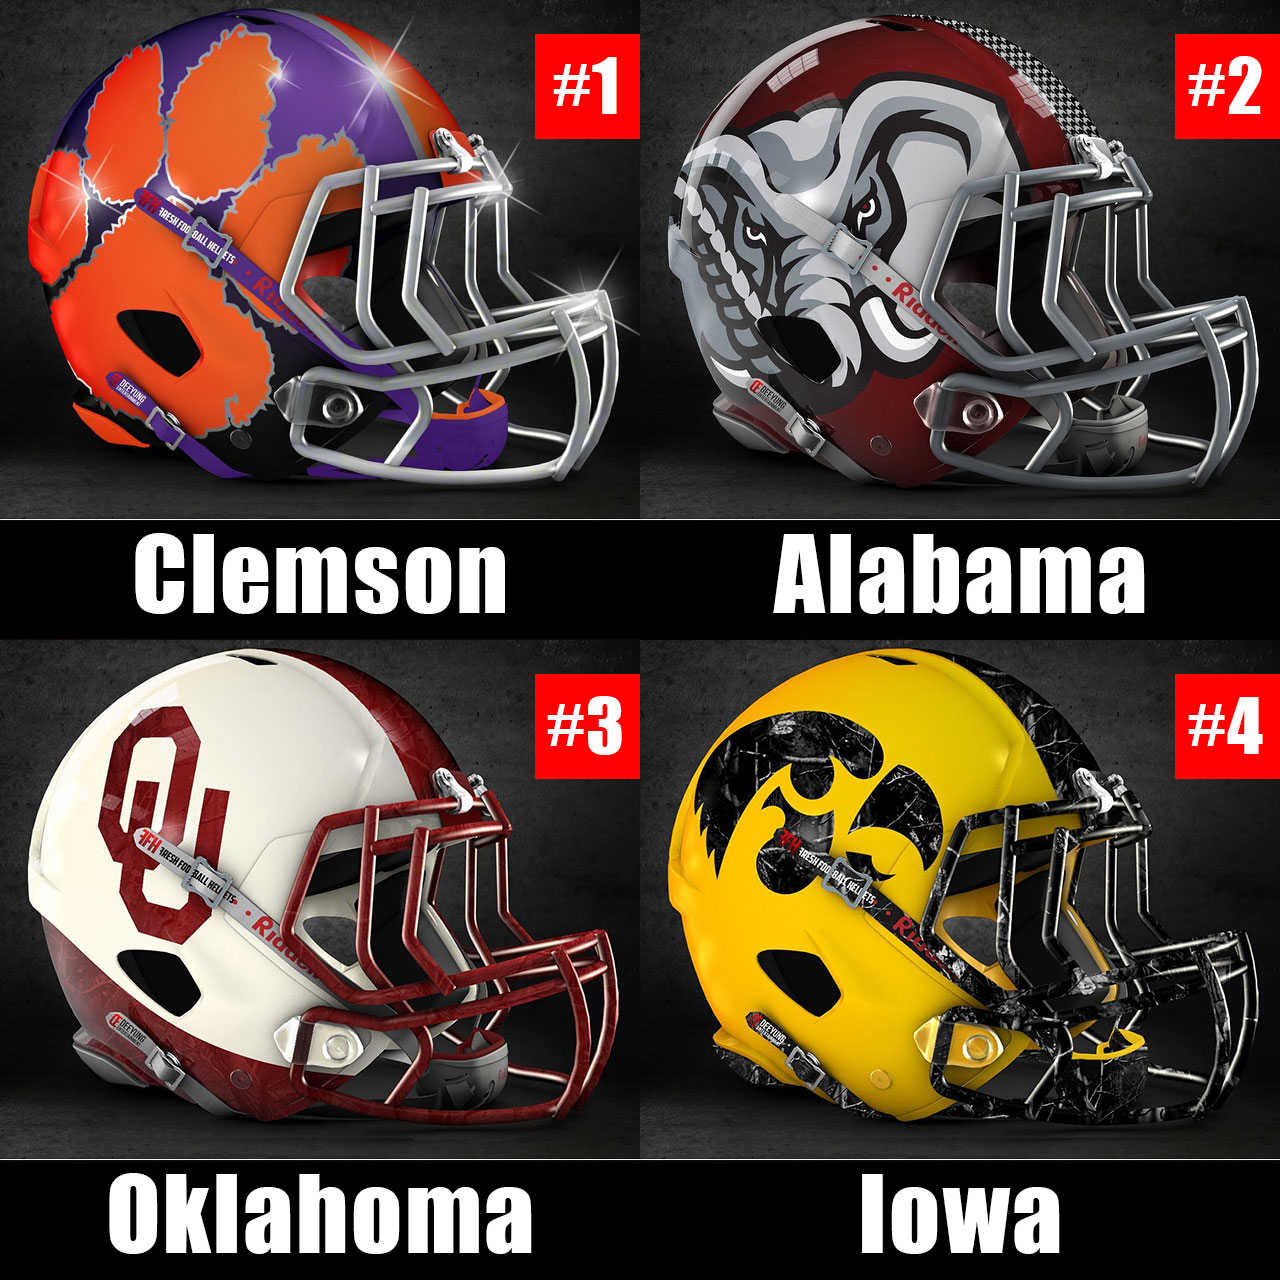 College Football Playoff Top Four with Tigers, Crimson Tide, Sooners, Hawkeyes